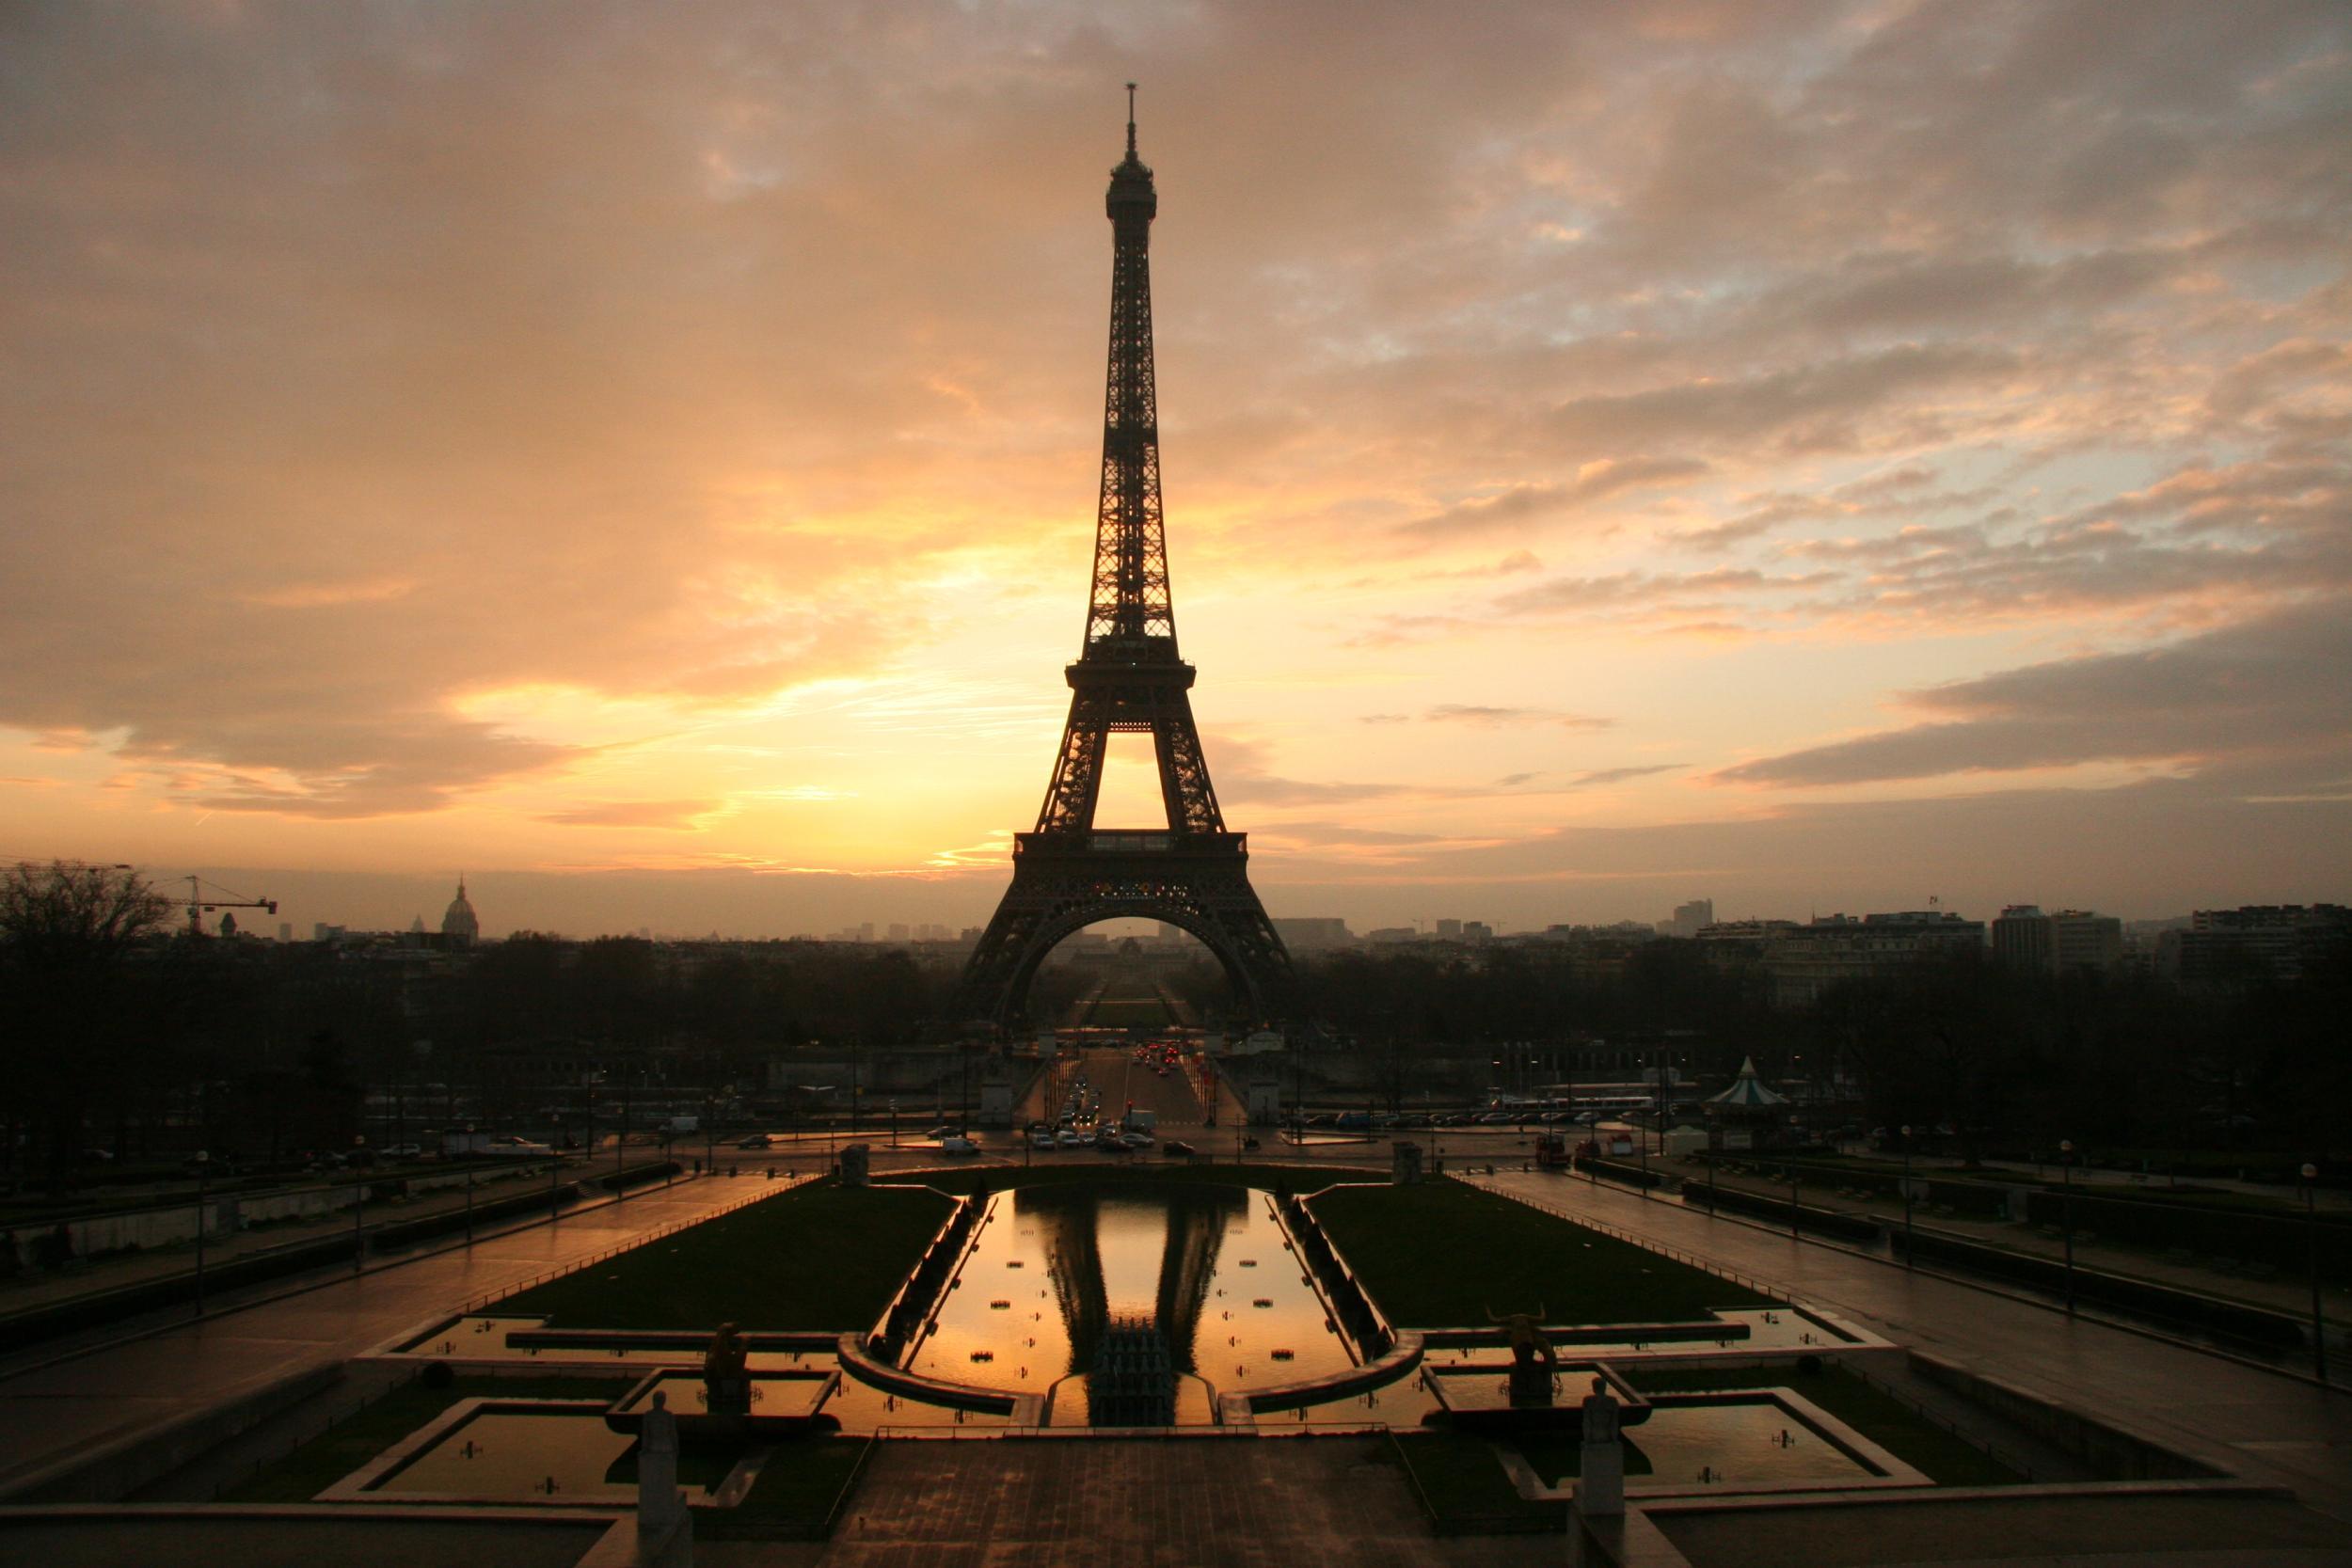 High-net-worth individuals are ditching Paris in fear of terror attacks and robberies